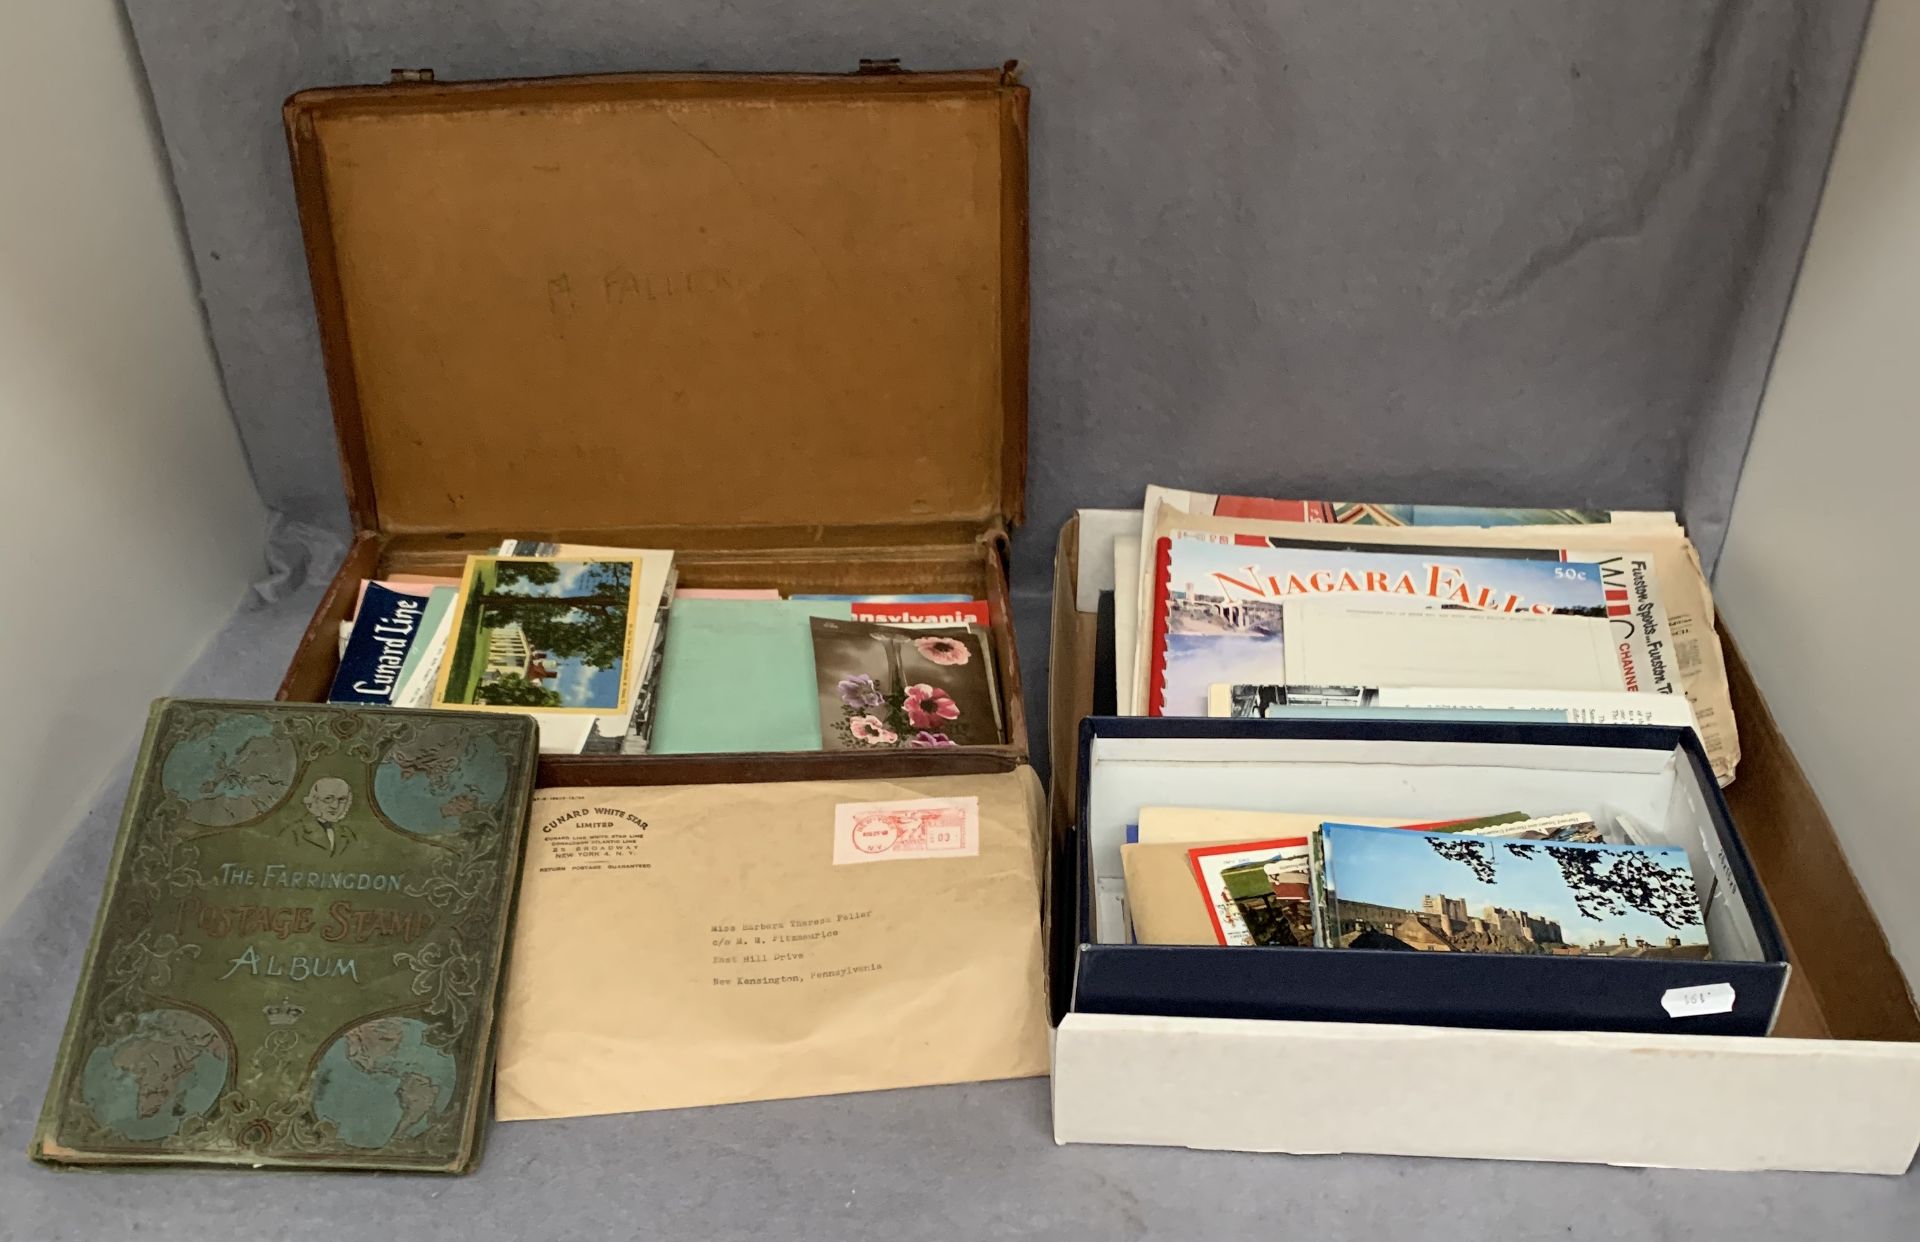 Contents to brown fibre suitcase and a box lid The Farringdon Postage Stamp album and contents -